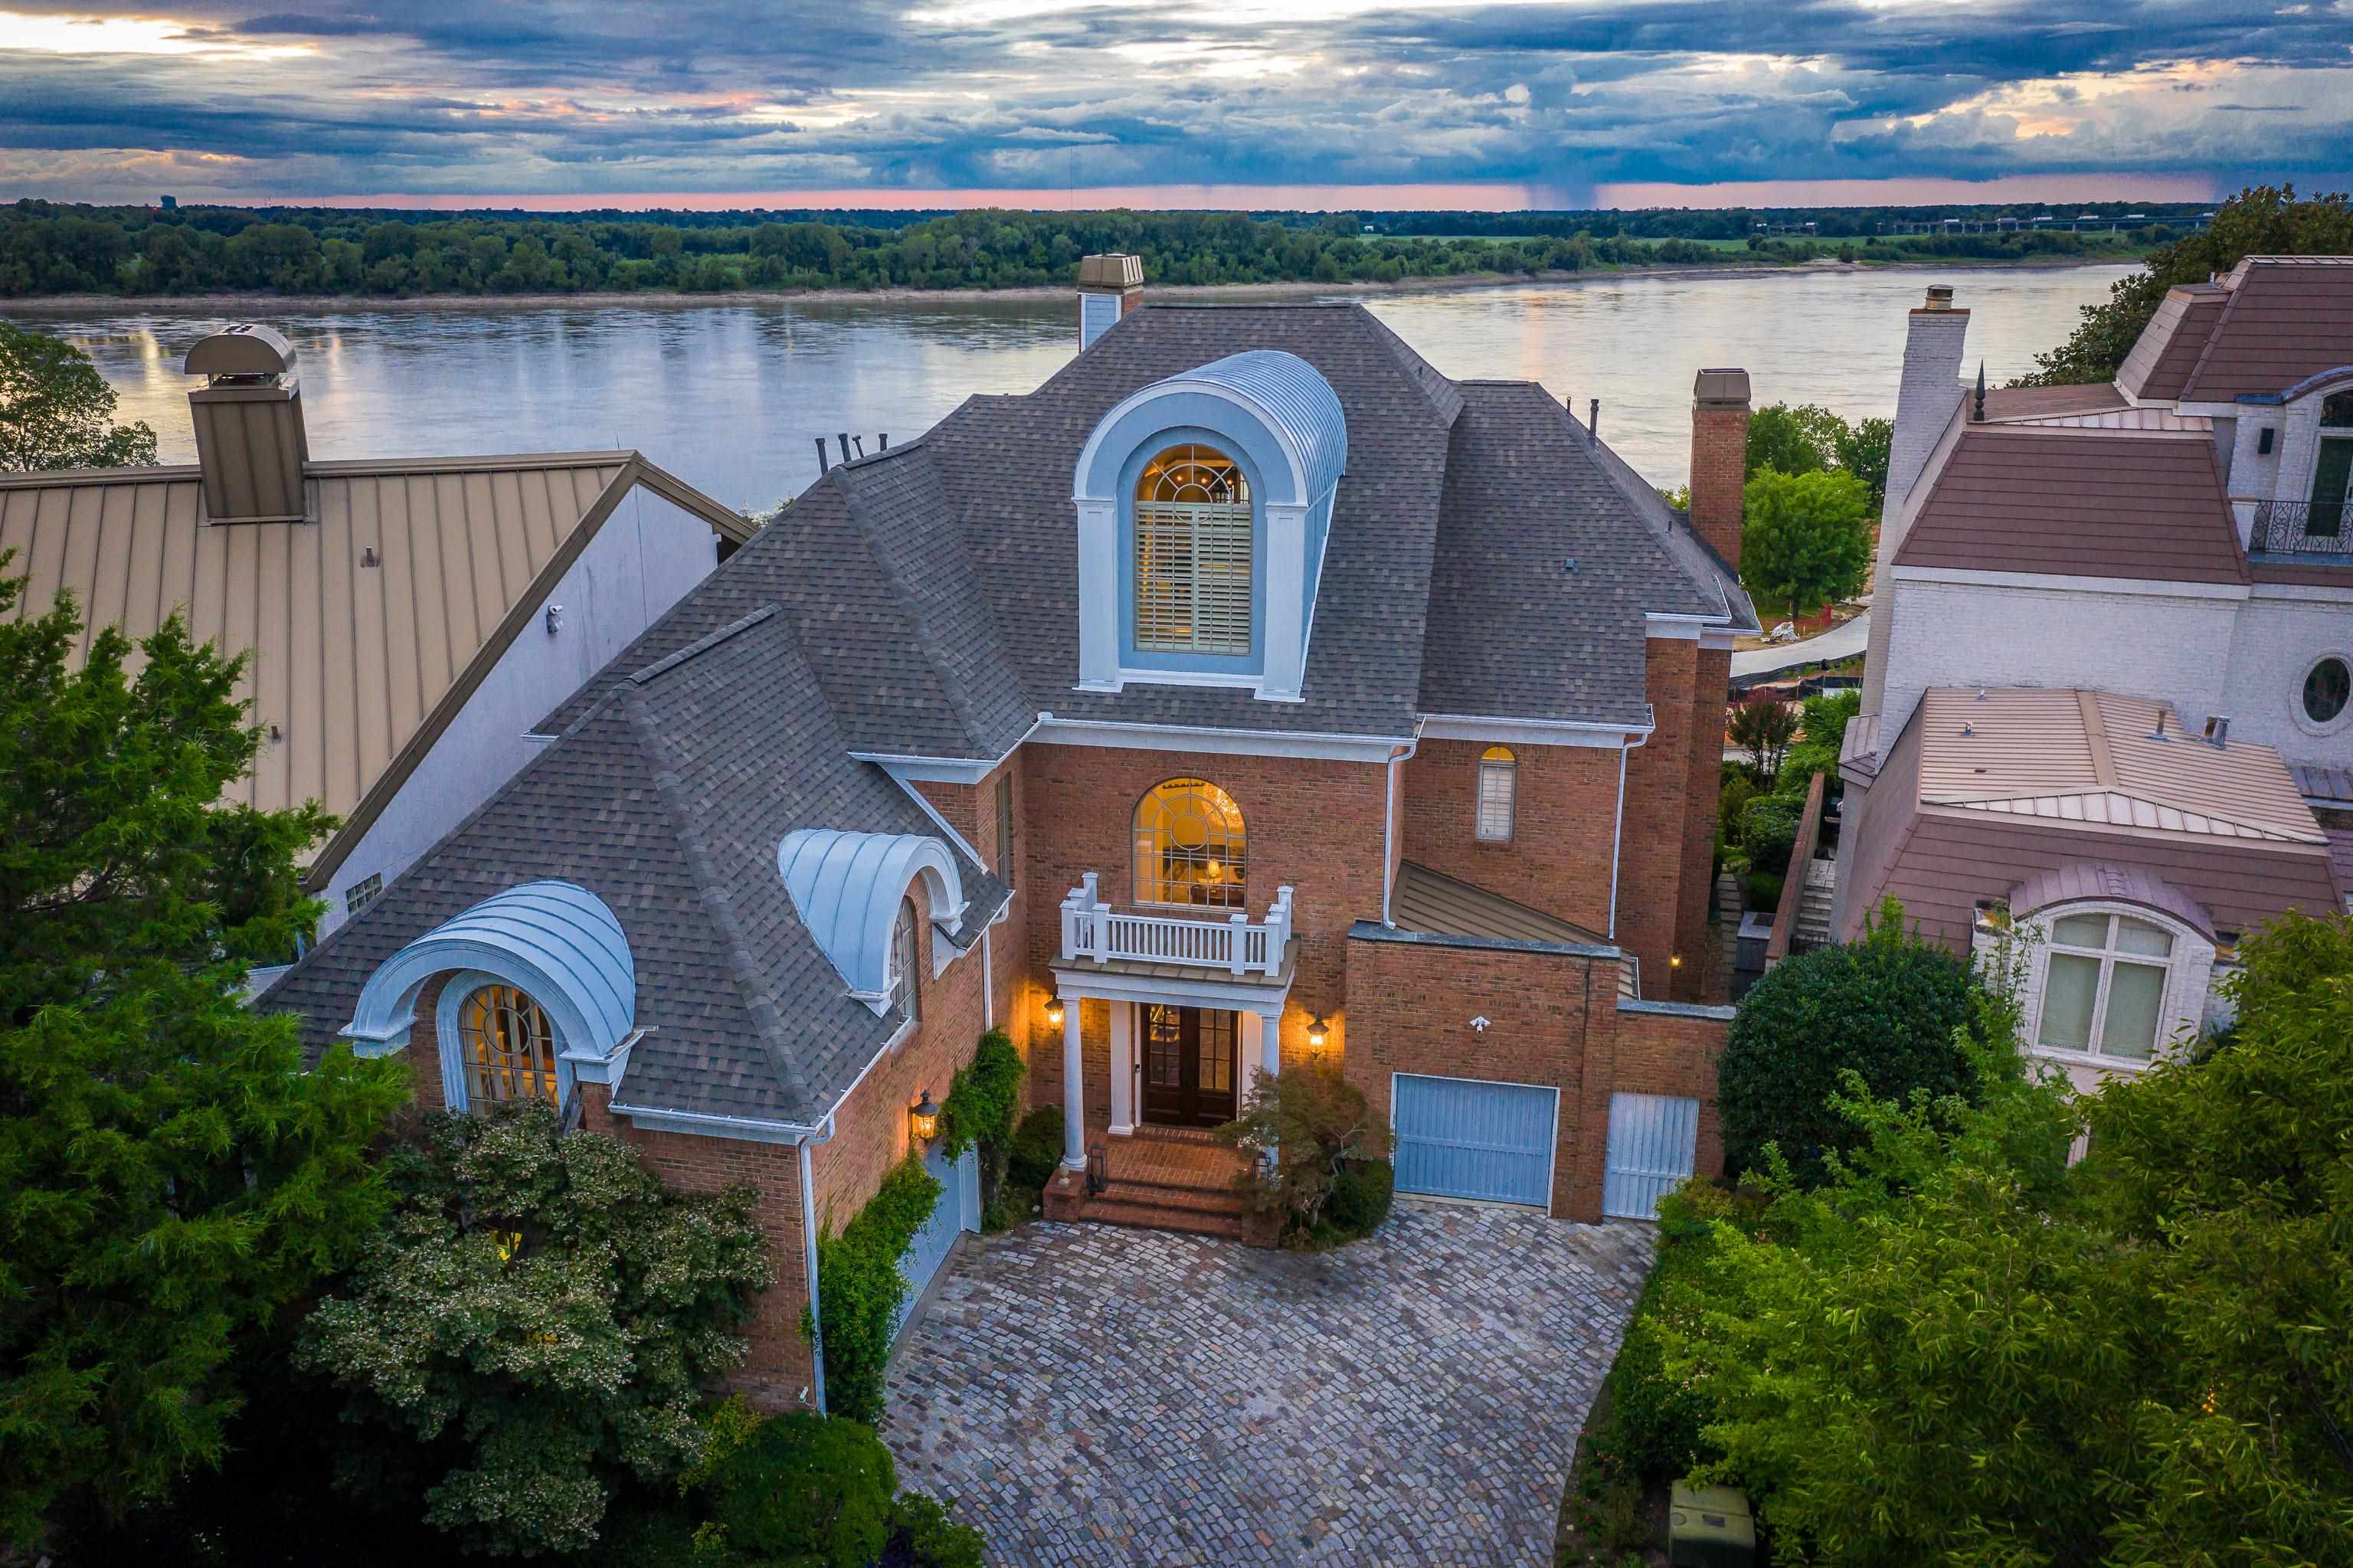 Located in the private gated community of South Bluffs and overlooking the mighty Mississippi River in Downtown Memphis. Just blocks away from some of the best restaurants, sports and entertainment that Memphis has to offer!